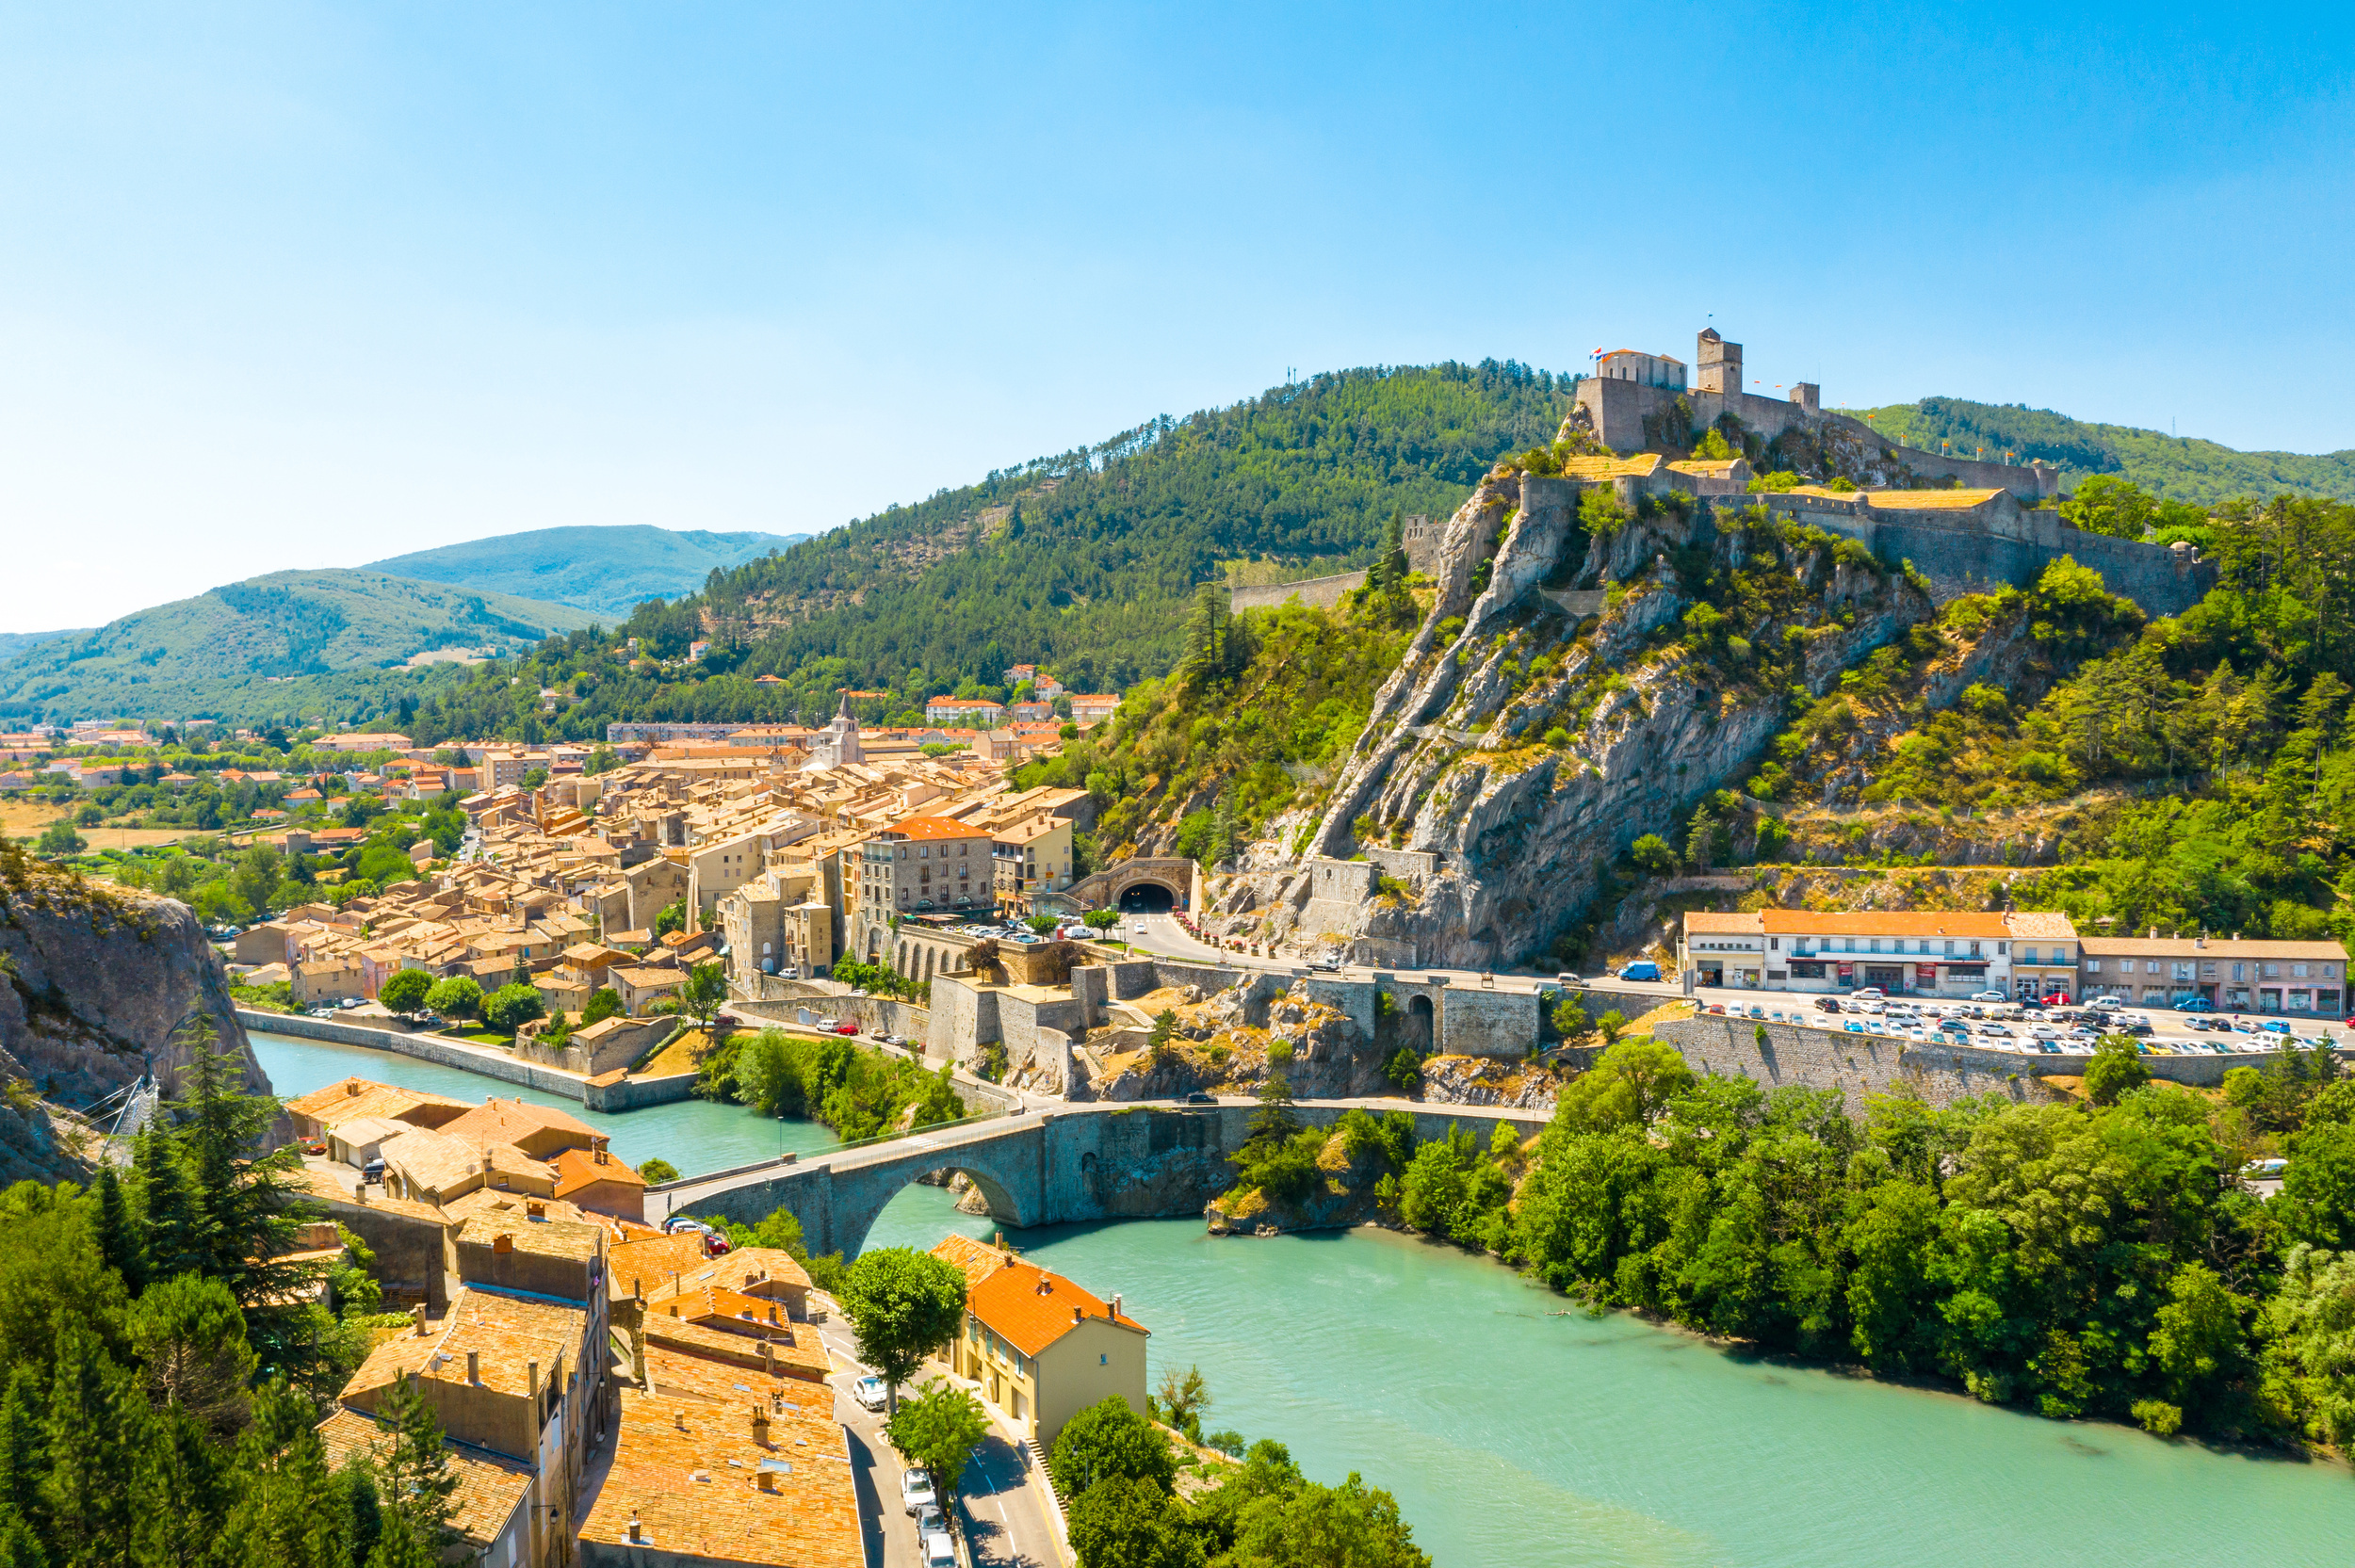 <p>Another great southern hiking location, Sisteron is the perfect mix of the Alps and Provence. The Durance River runs right through town, and the peaks tower above. It's great for outdoor lovers.</p><p>You may also like: <a href='https://www.yardbarker.com/lifestyle/articles/20_tasty_meals_that_you_can_make_with_cold_cuts_031324/s1__20412076'>20 tasty meals that you can make with cold cuts</a></p>